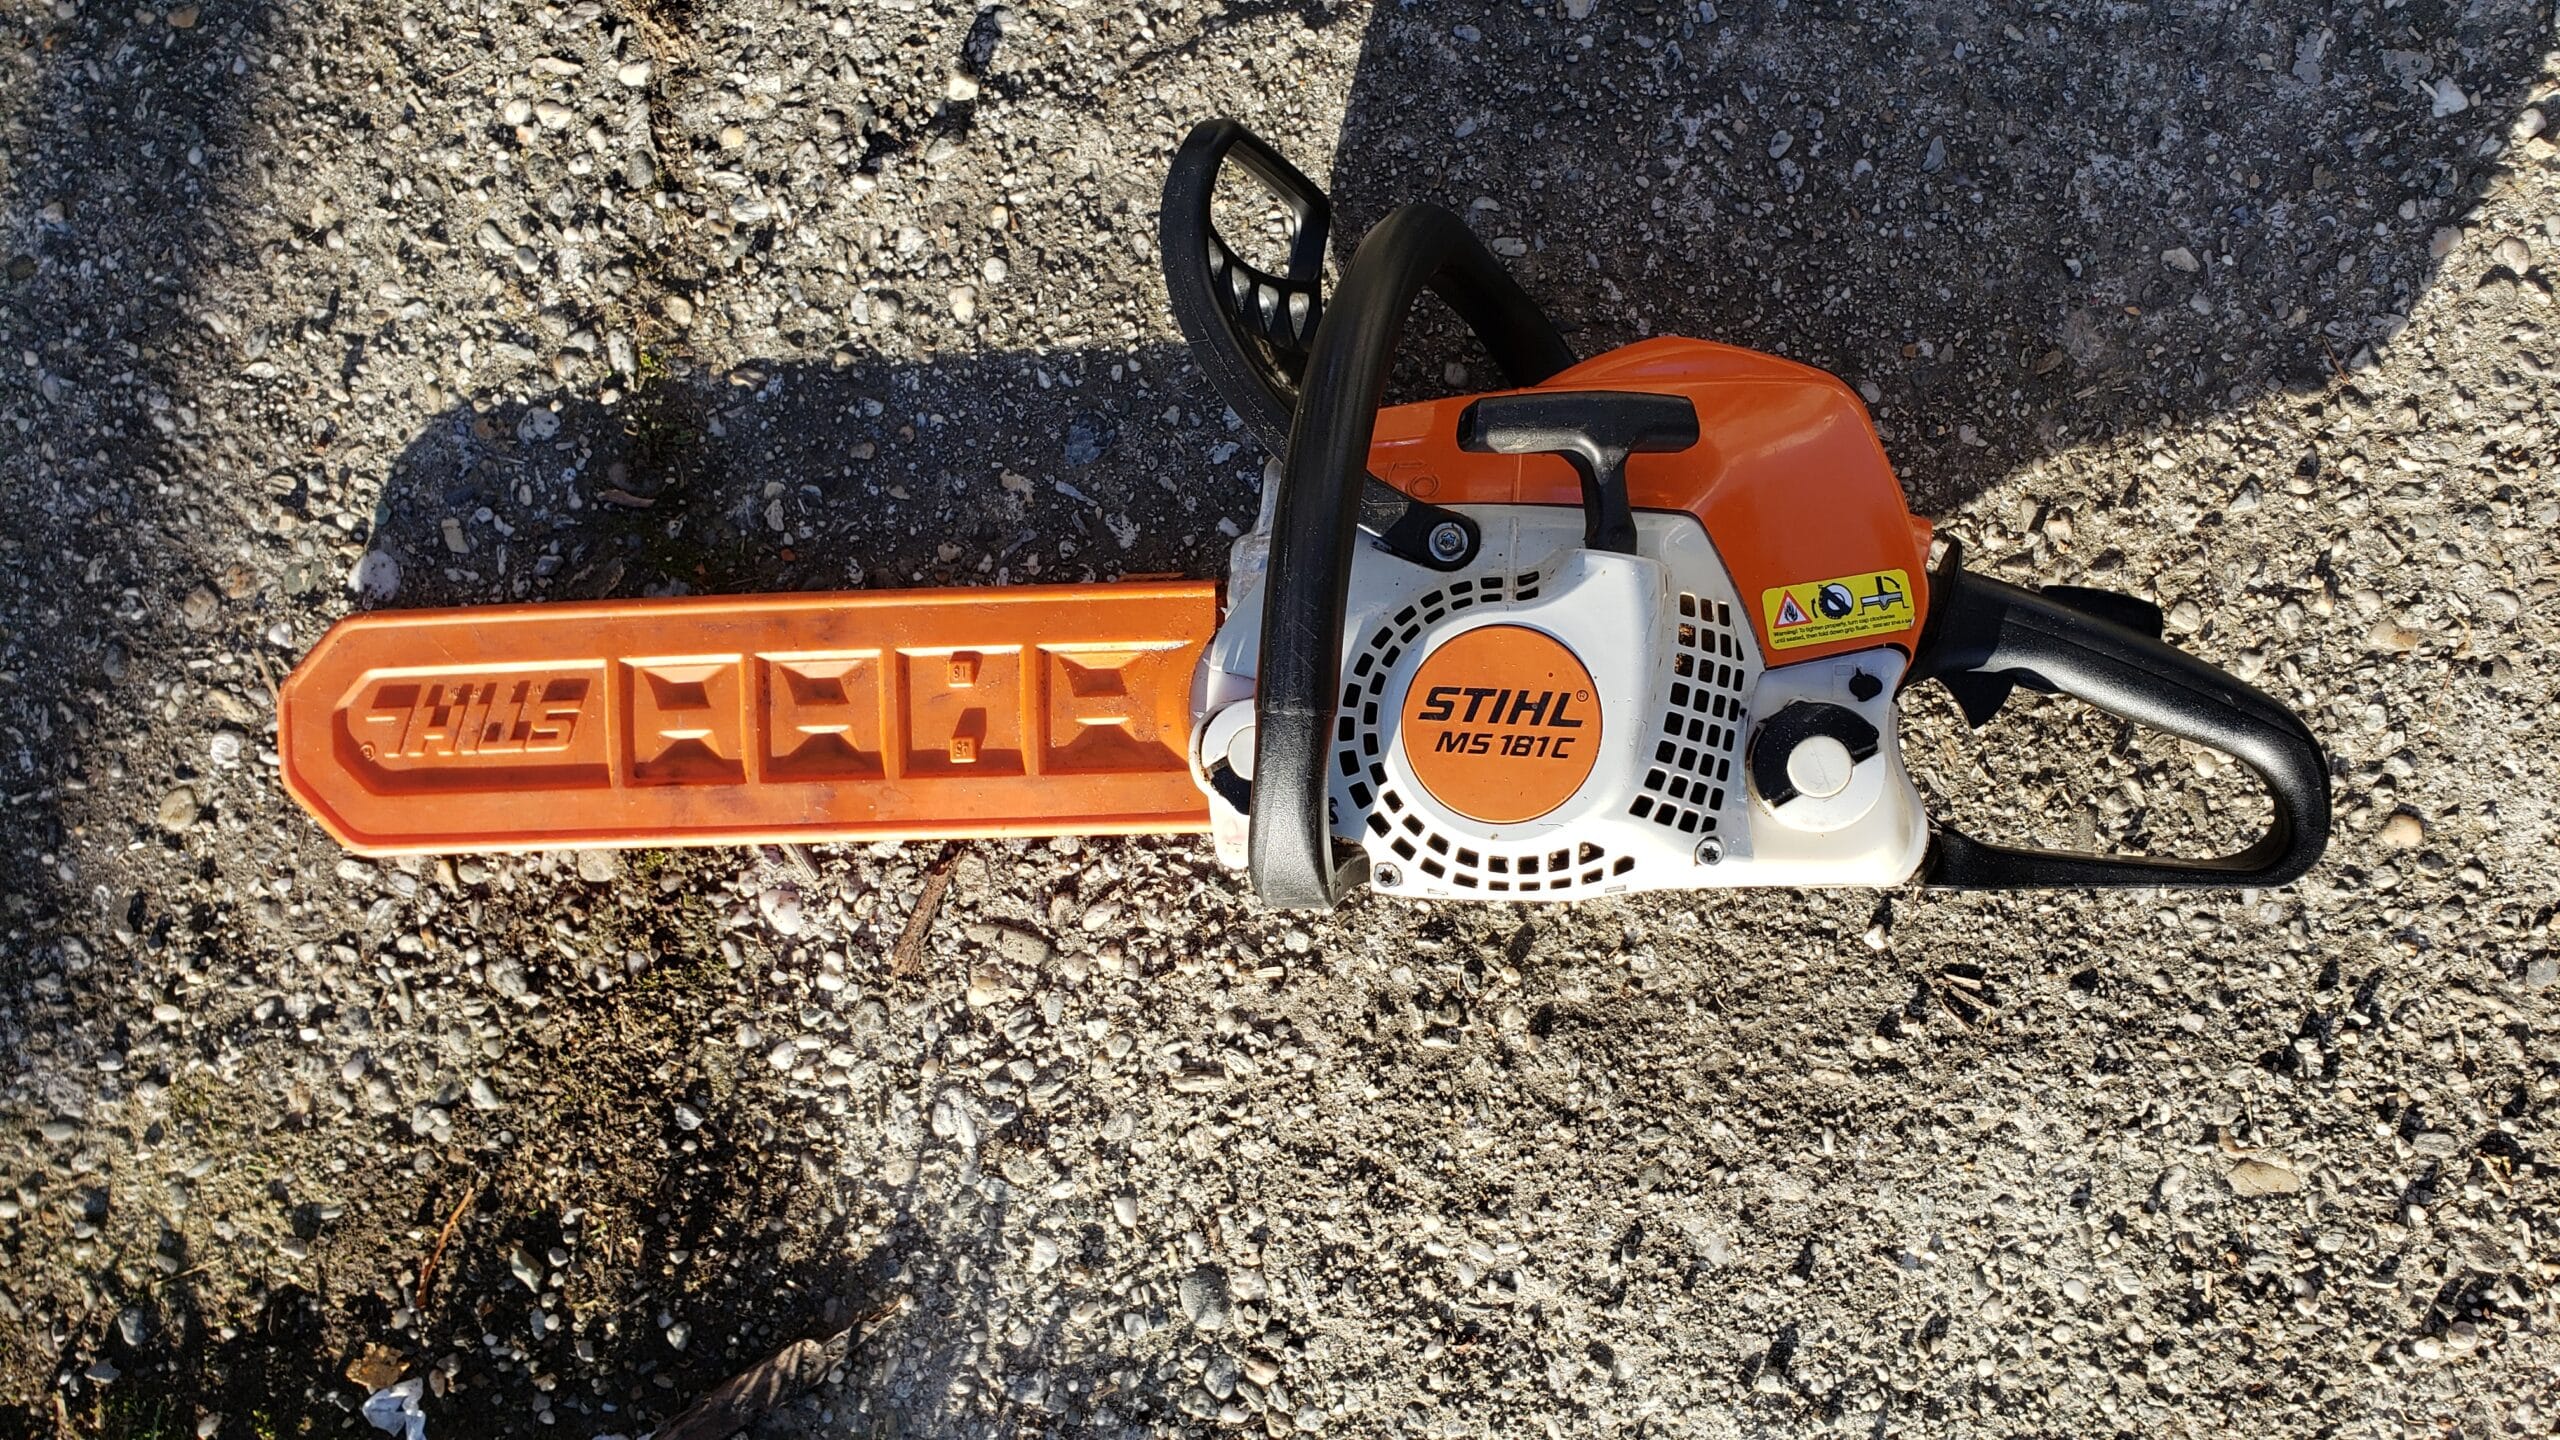 Chainsaw ms 180 STIHL with Motor 2-mix cm.40 blade for cutting firewood